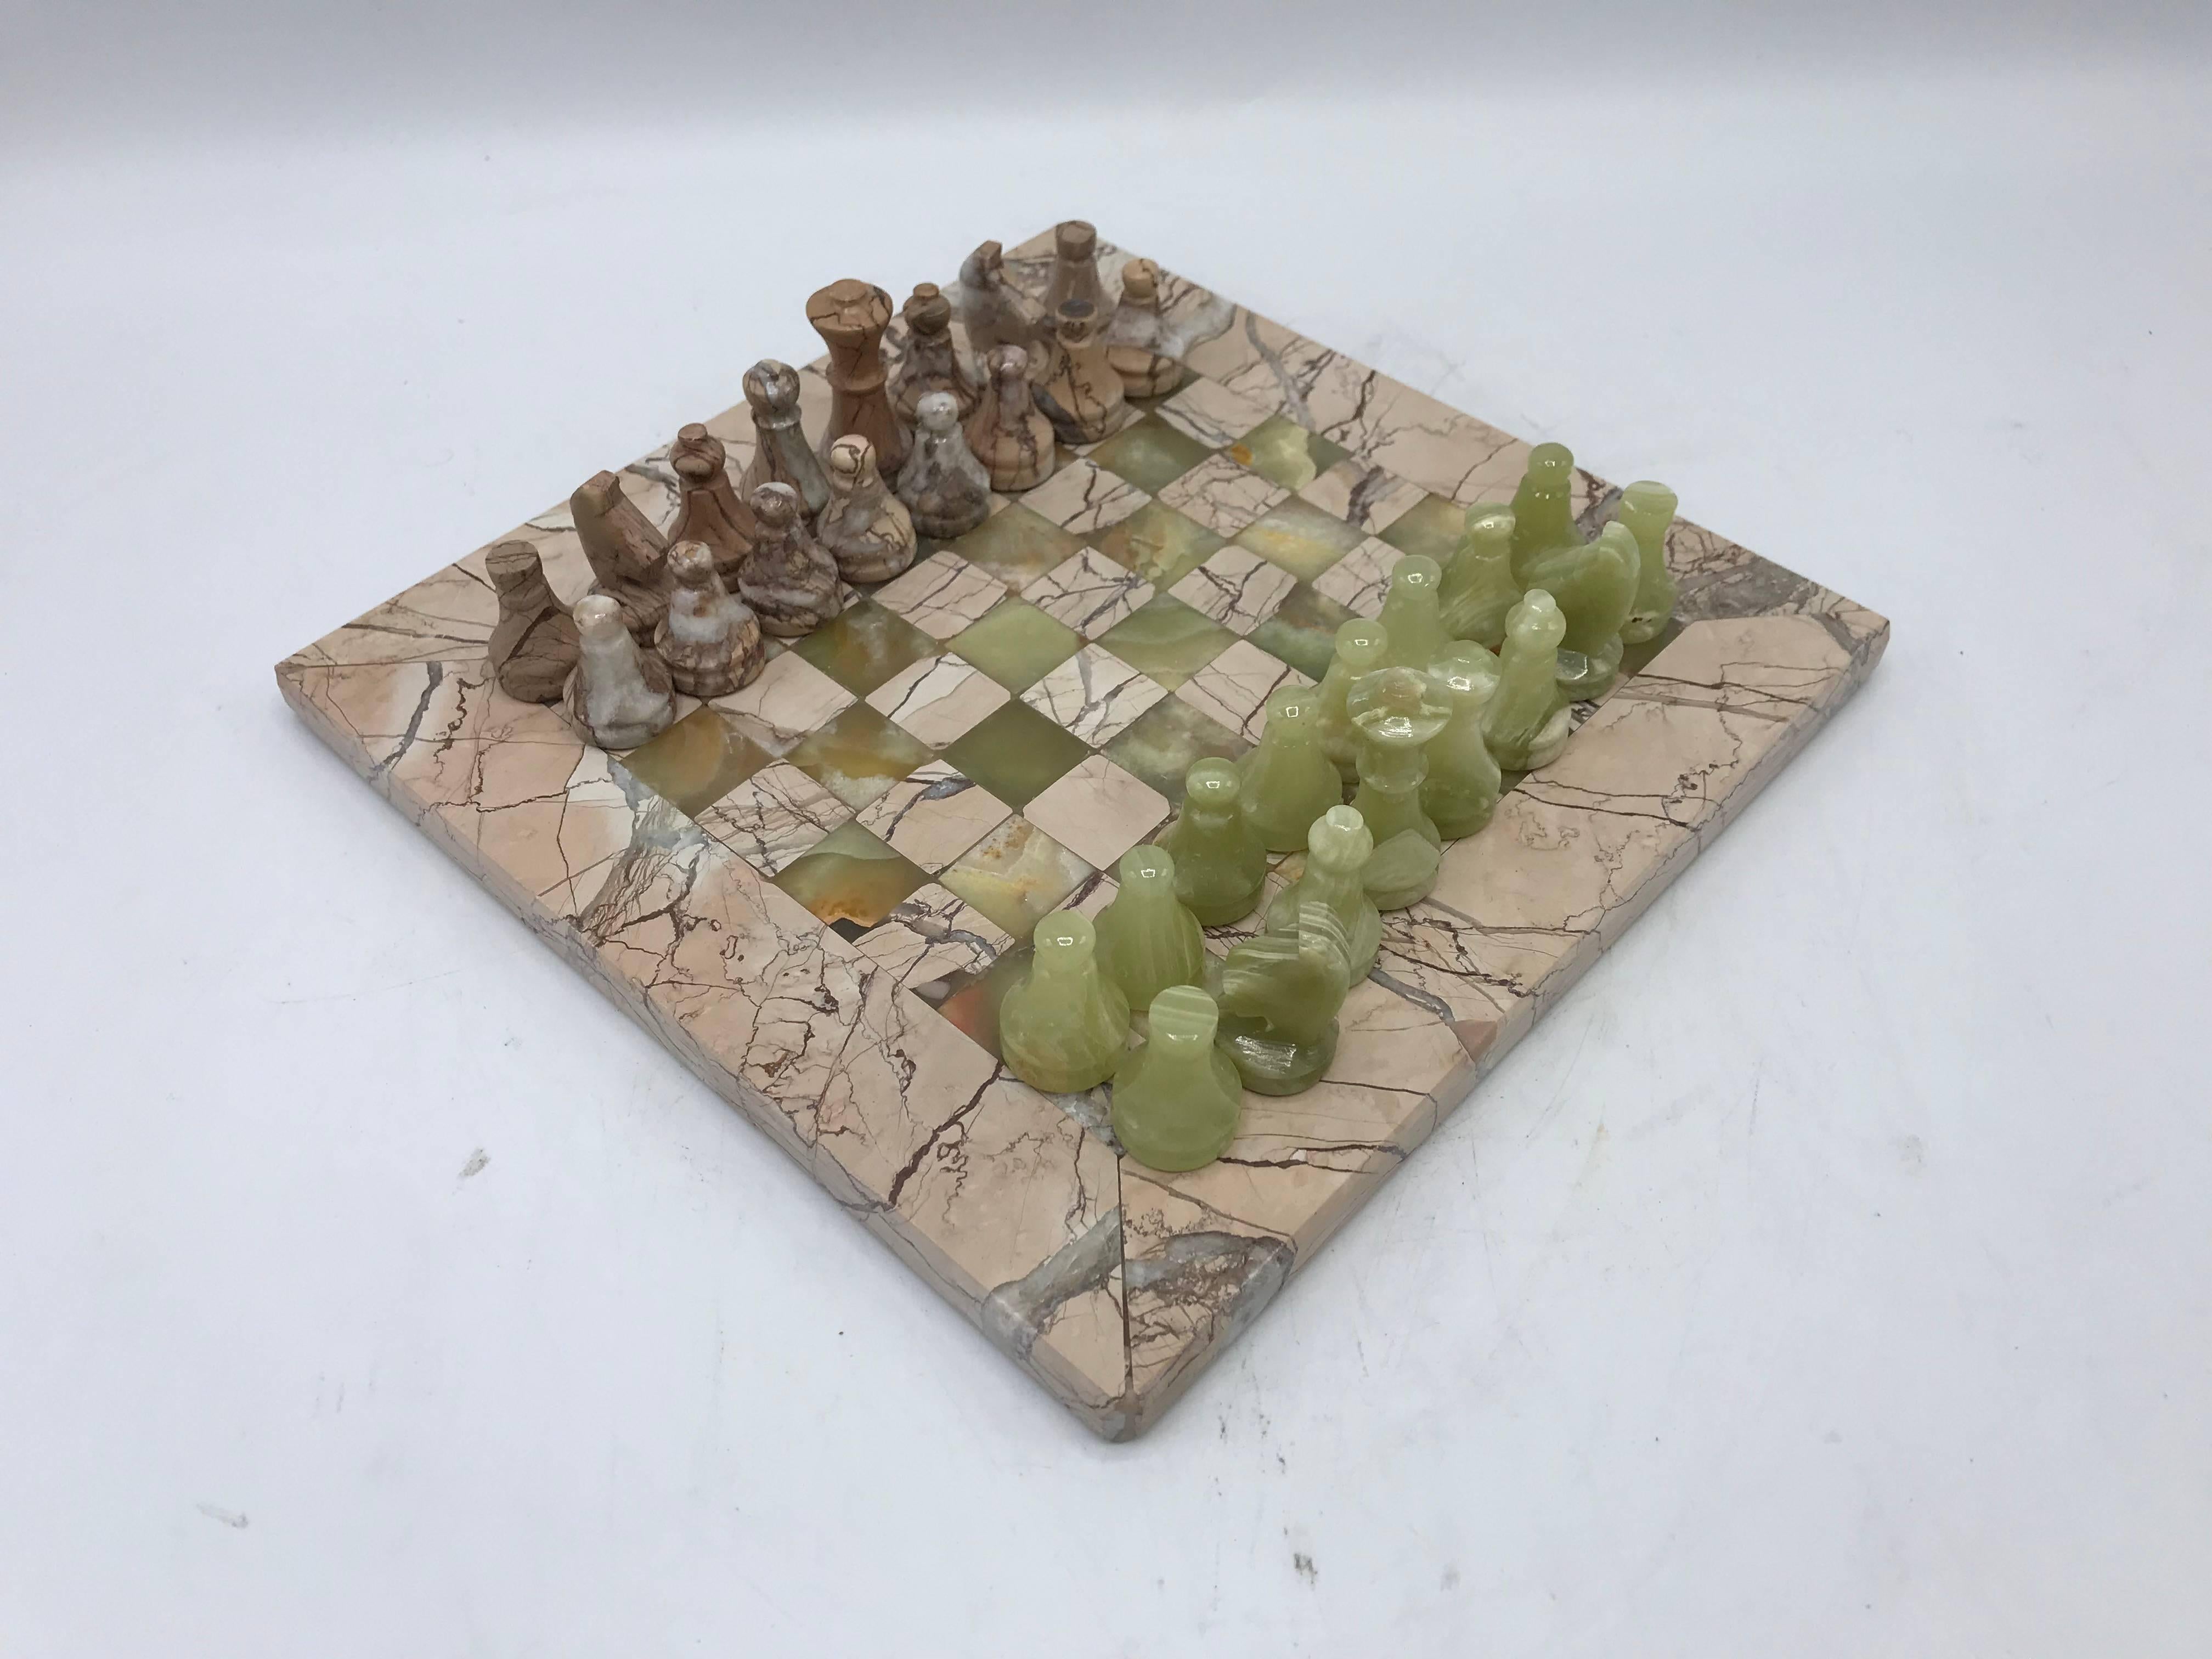 Offered is a fabulous, 1970s Italian marble and onyx chess set. Set includes all pieces. Heavy. Pieces vary in size, from 0.75in to 1.75in each.